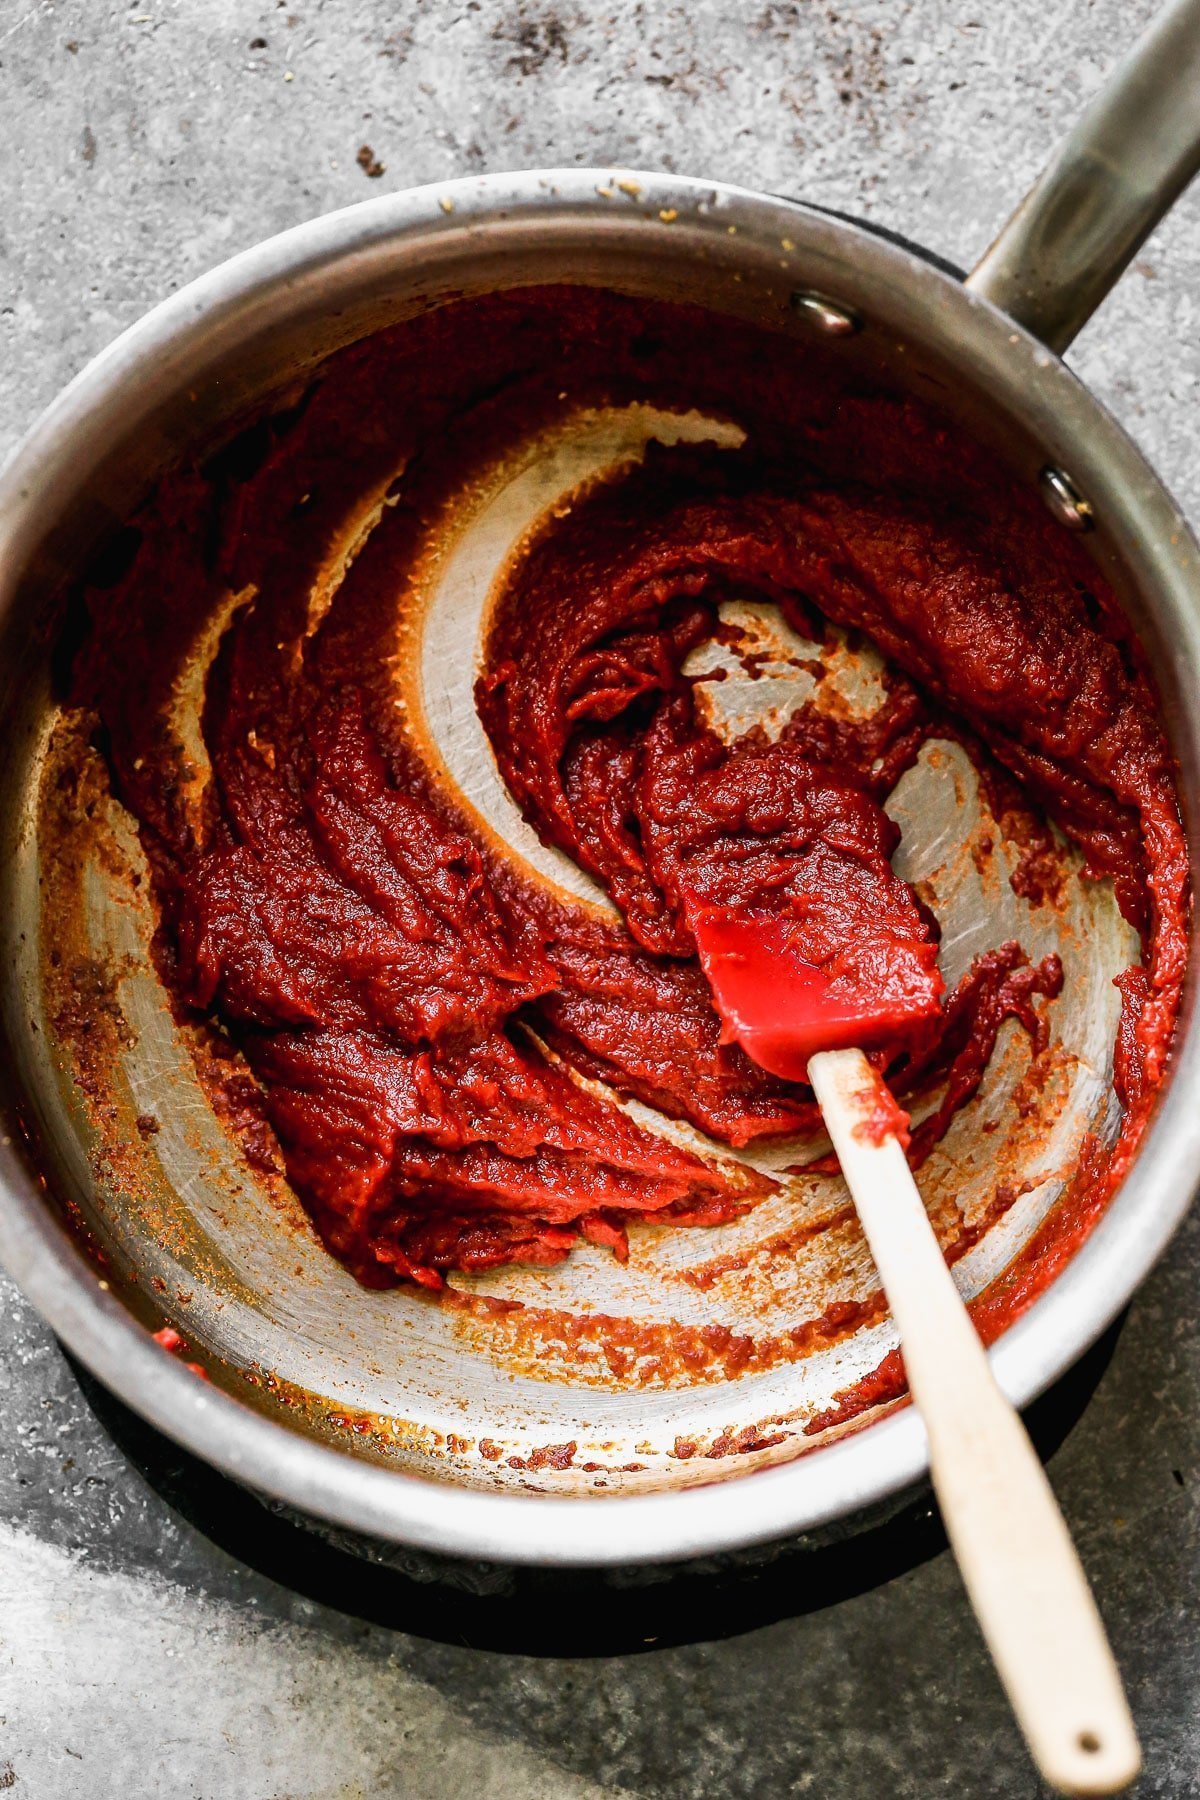 Cook tomato paste with garlic and olive oil.